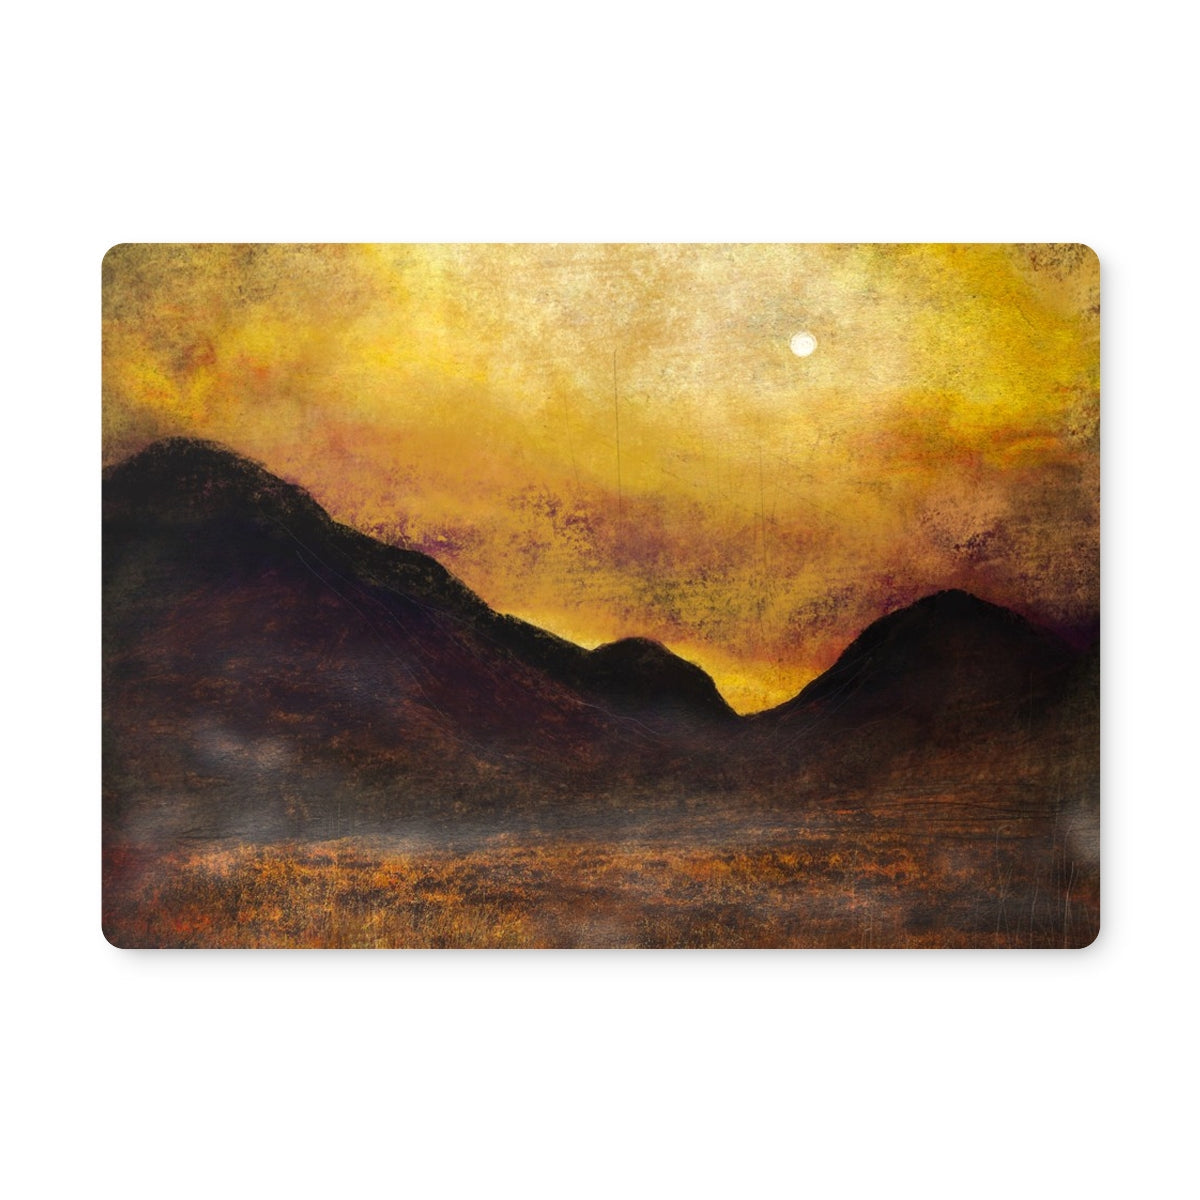 Glencoe Moonlight Art Gifts Placemat-Placemats-Glencoe Art Gallery-6 Placemats-Paintings, Prints, Homeware, Art Gifts From Scotland By Scottish Artist Kevin Hunter